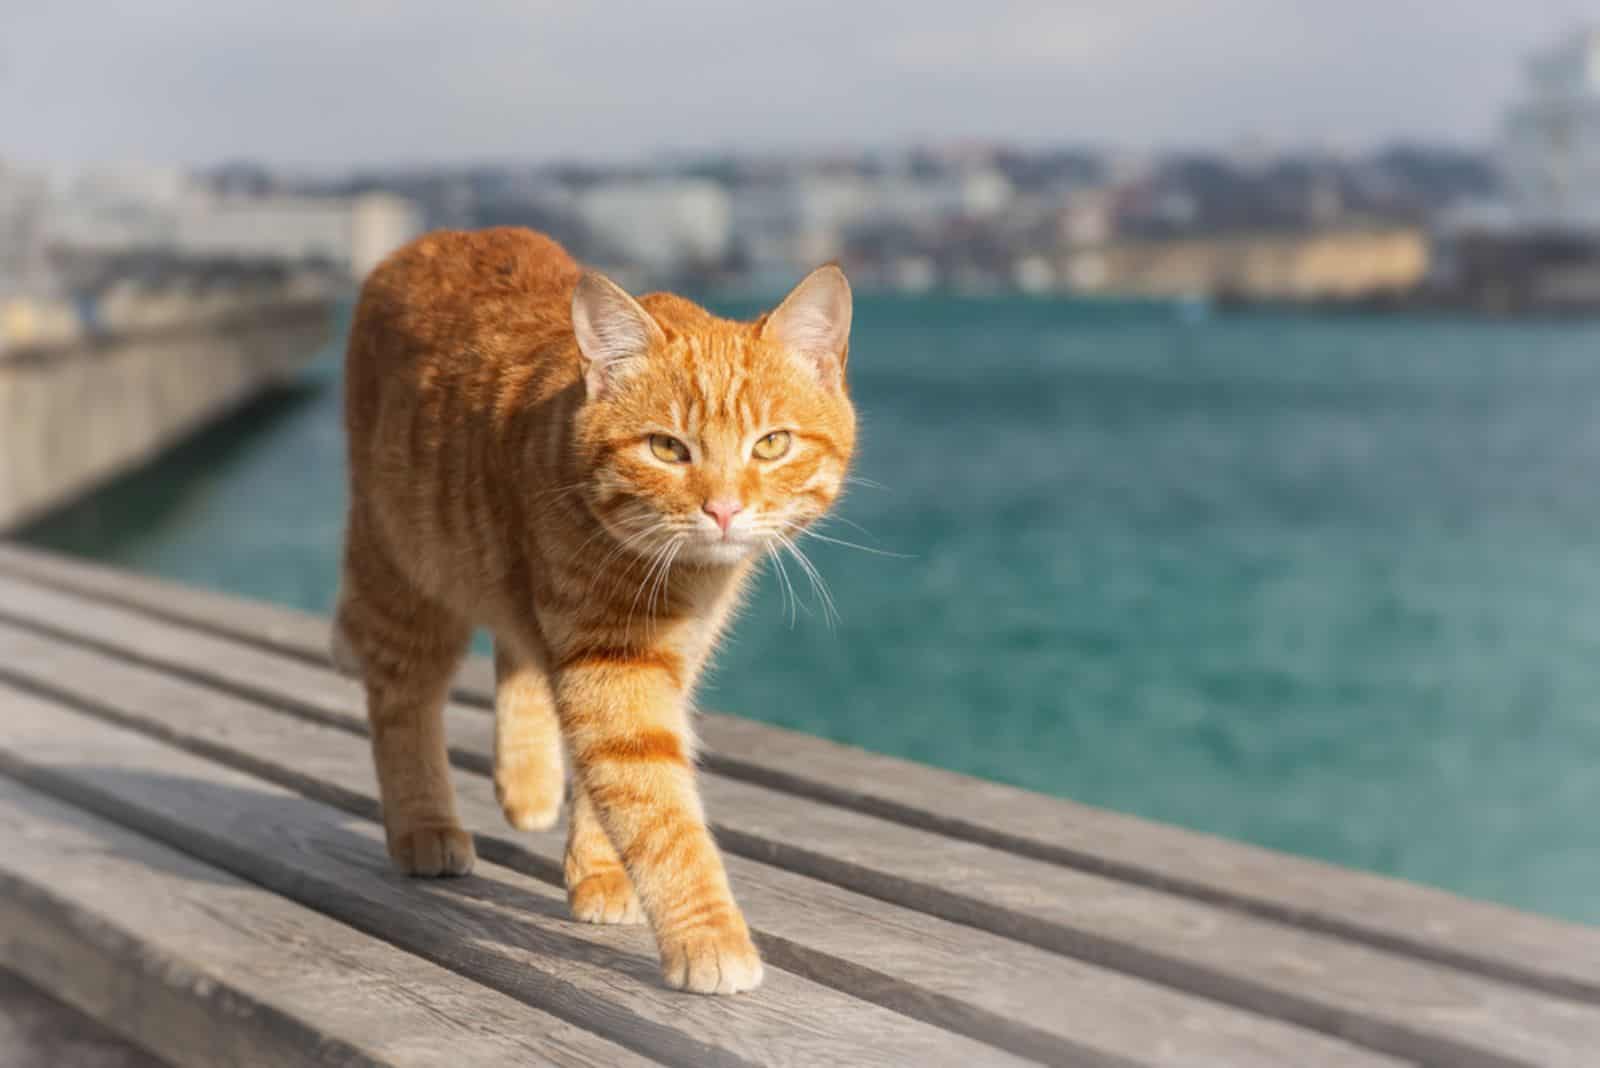 A red cat walks on a wooden deck